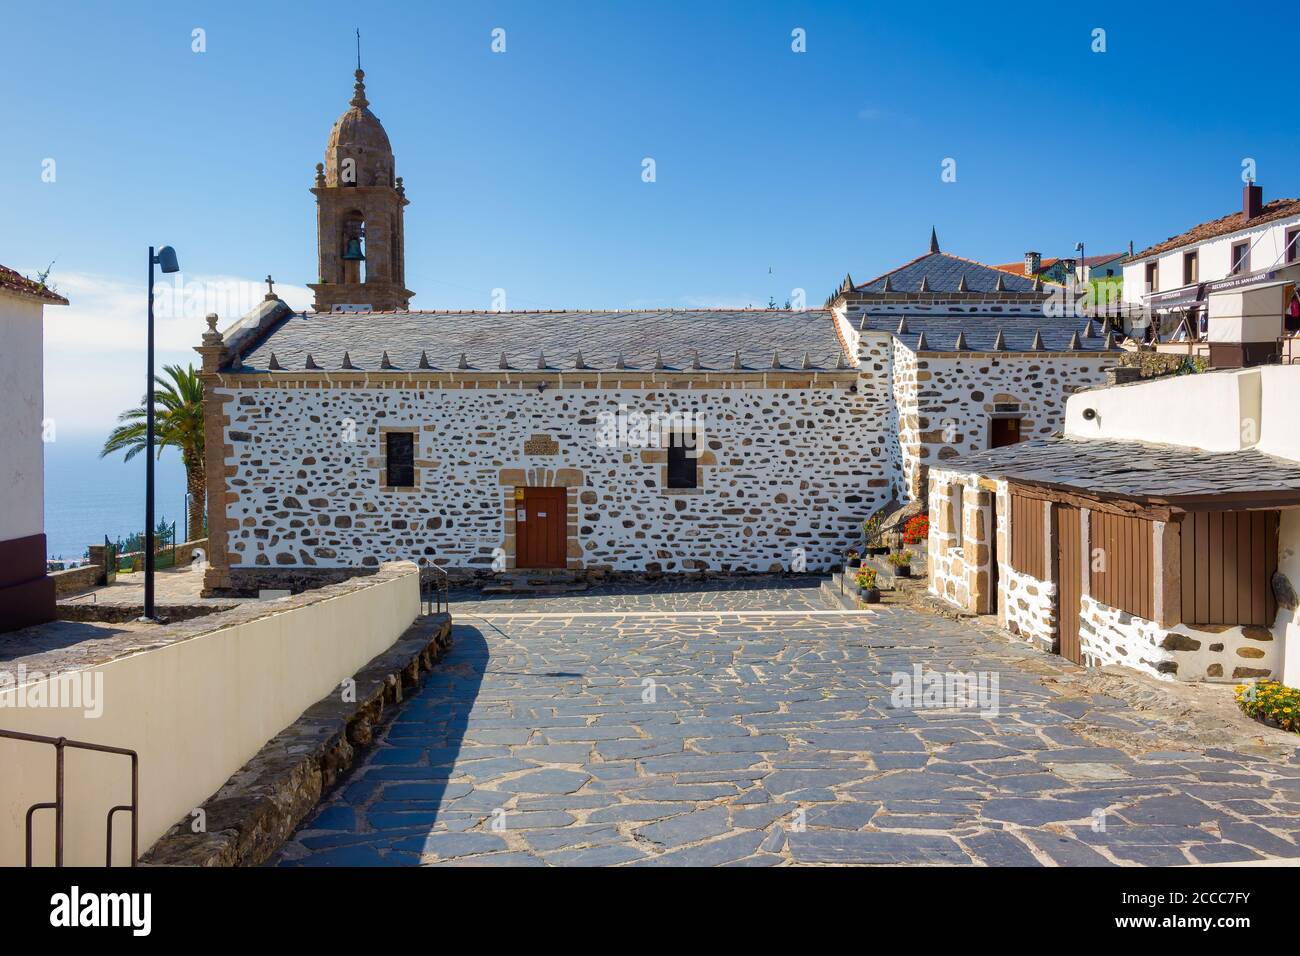 View of the church of the population of San Andres Teixido, Galicia, Spain Stock Photo